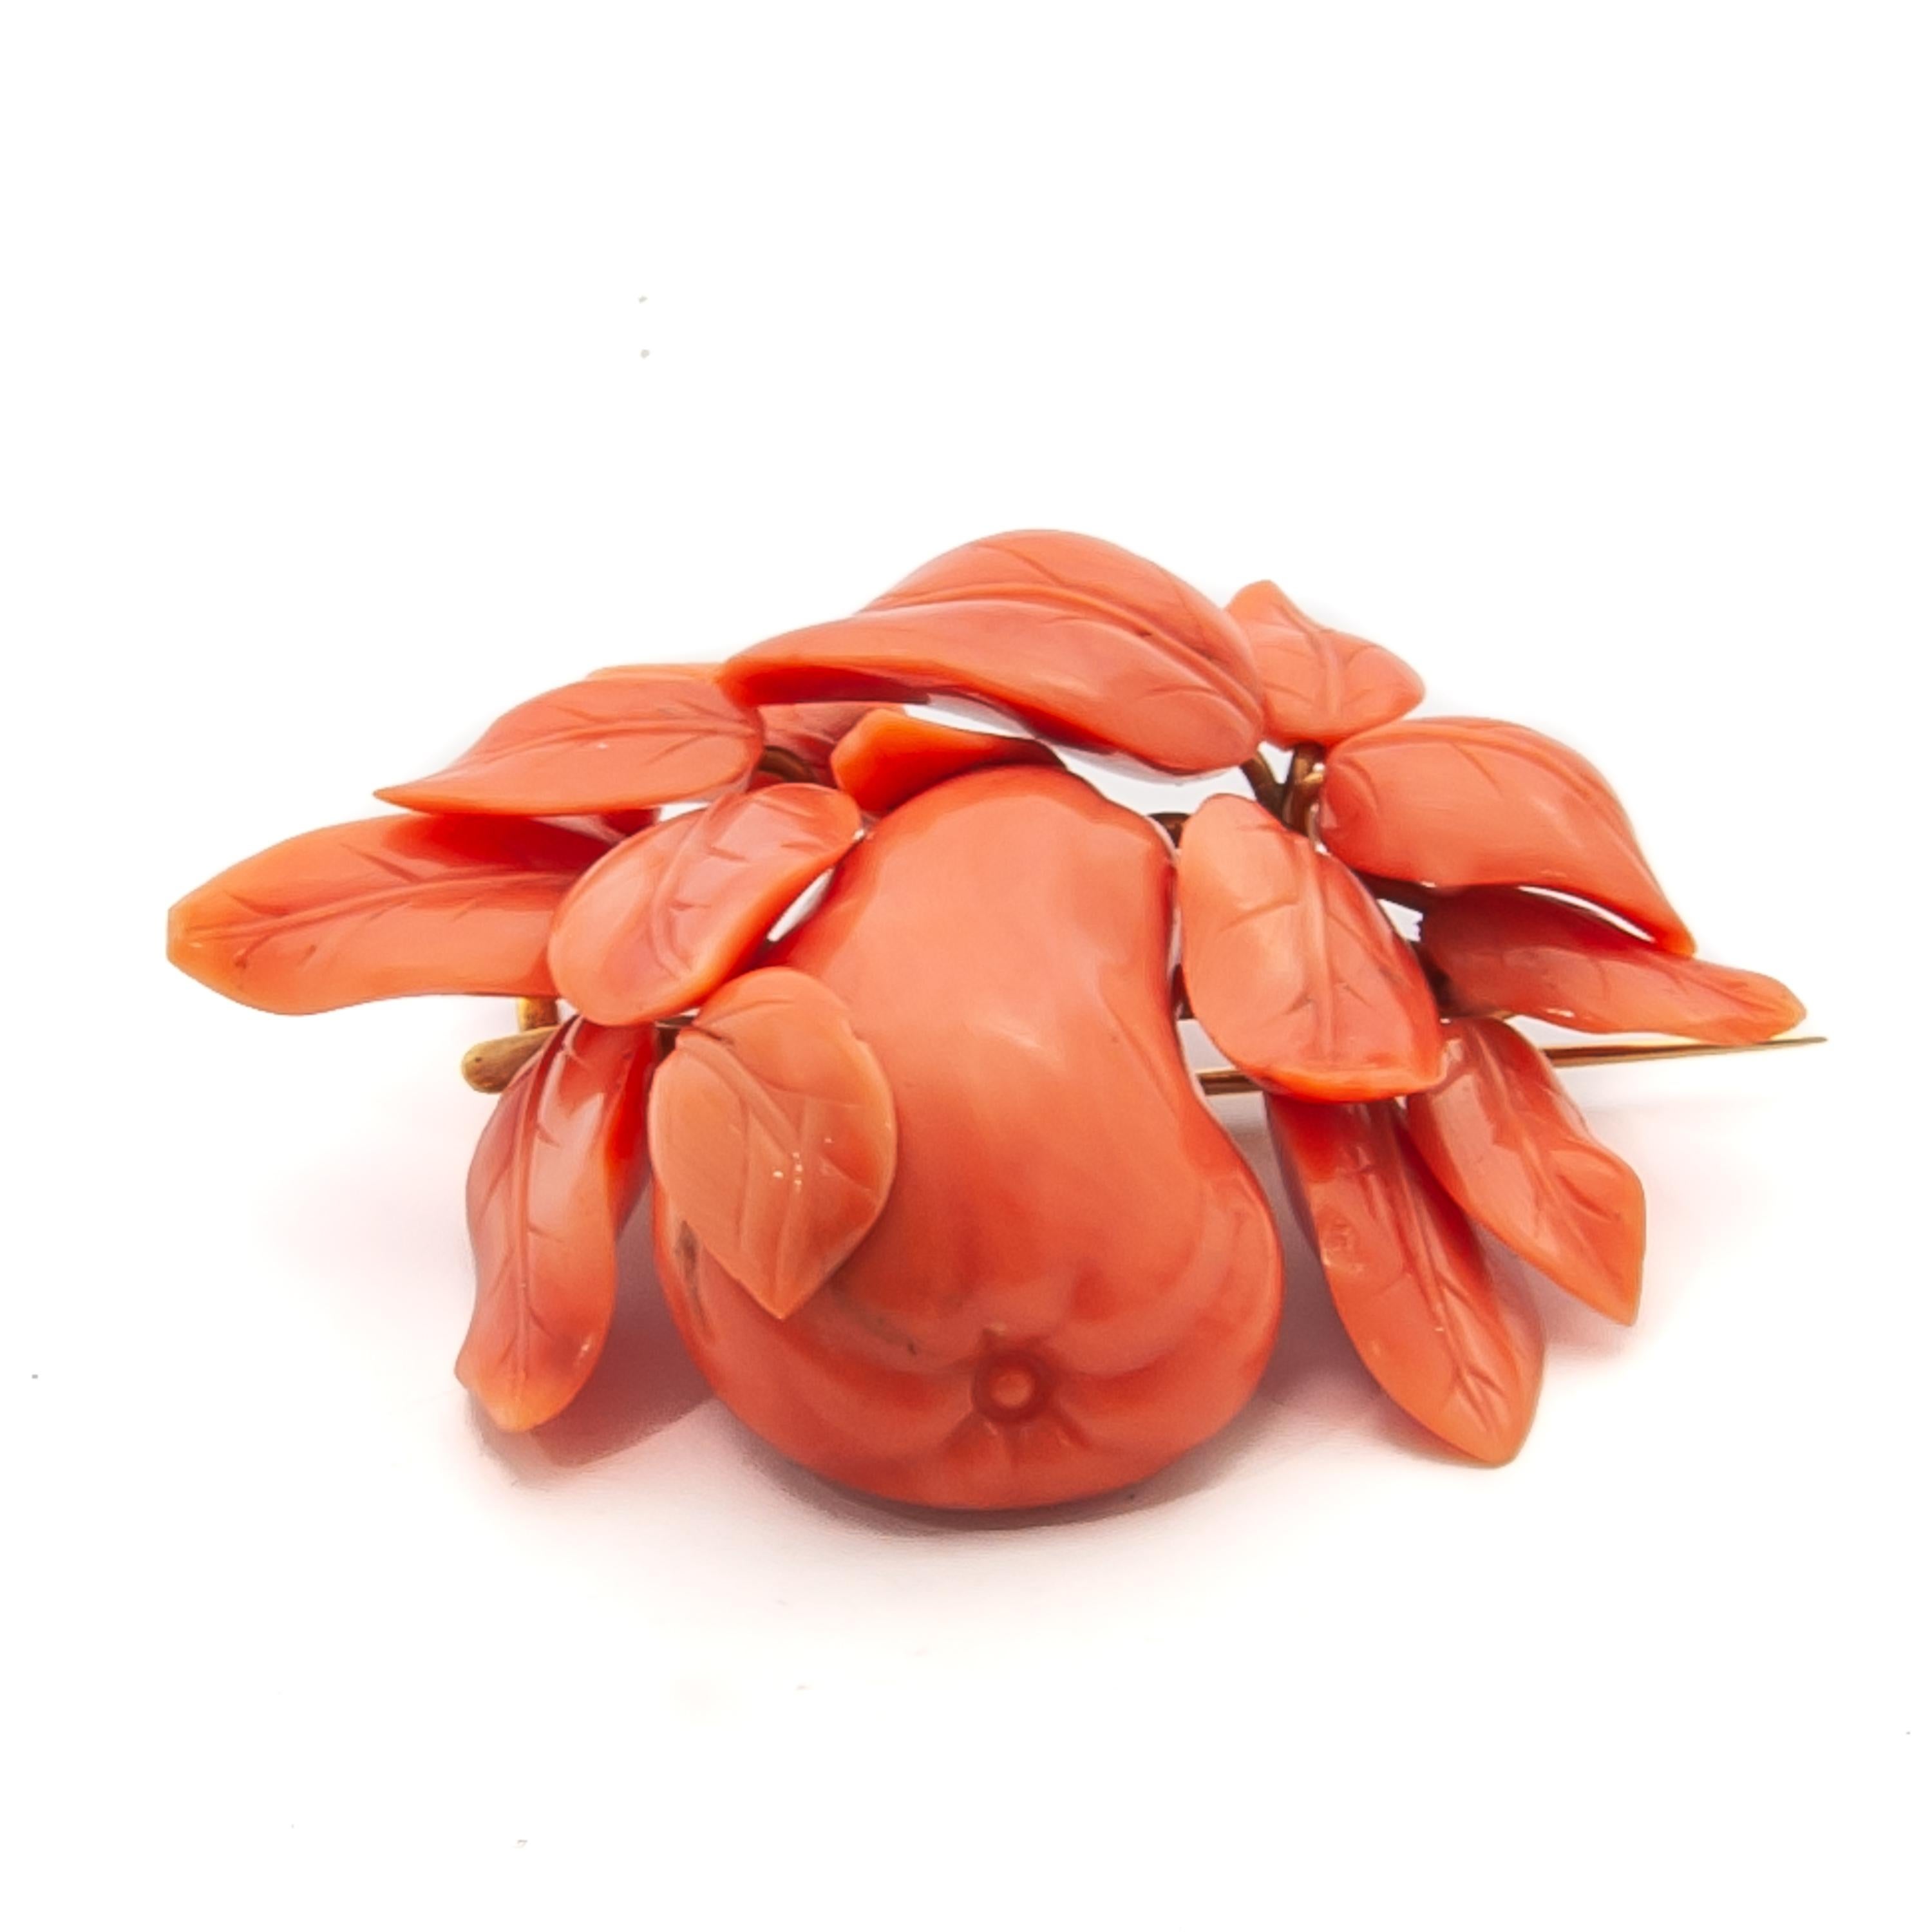 This antique fruit-carved coral brooch is absolutely gorgeous. The coral is so gracefully detailed with a very shapely pear surrounded by her vibrant leaves. The leaf veins are subtly visible, the leaves are so delicate you almost want to touch them